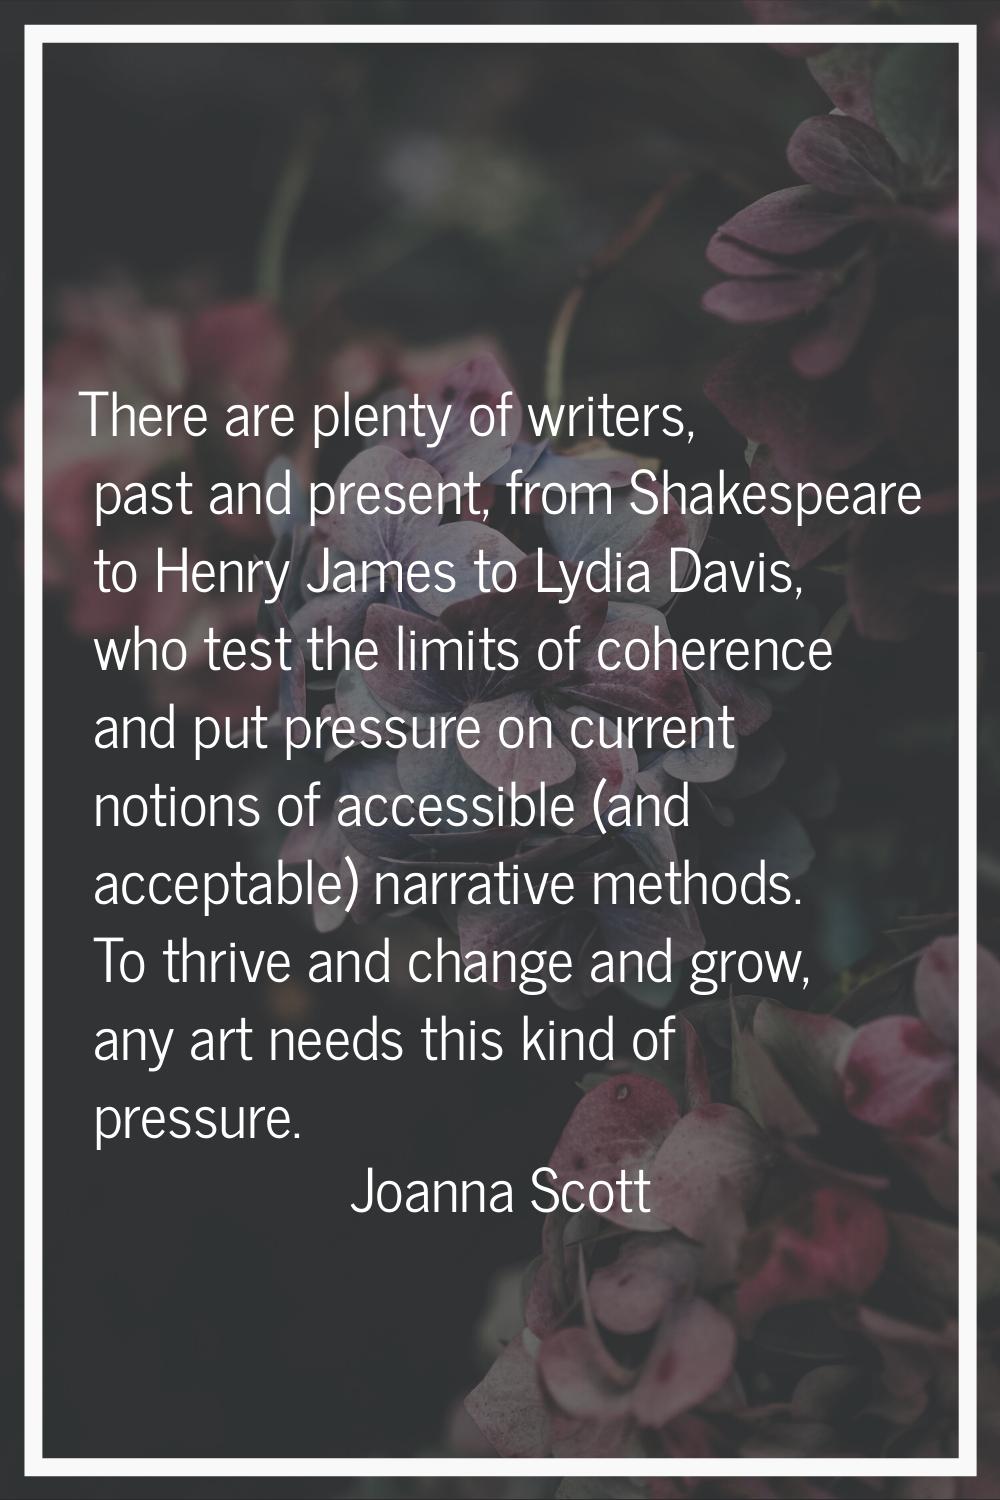 There are plenty of writers, past and present, from Shakespeare to Henry James to Lydia Davis, who 